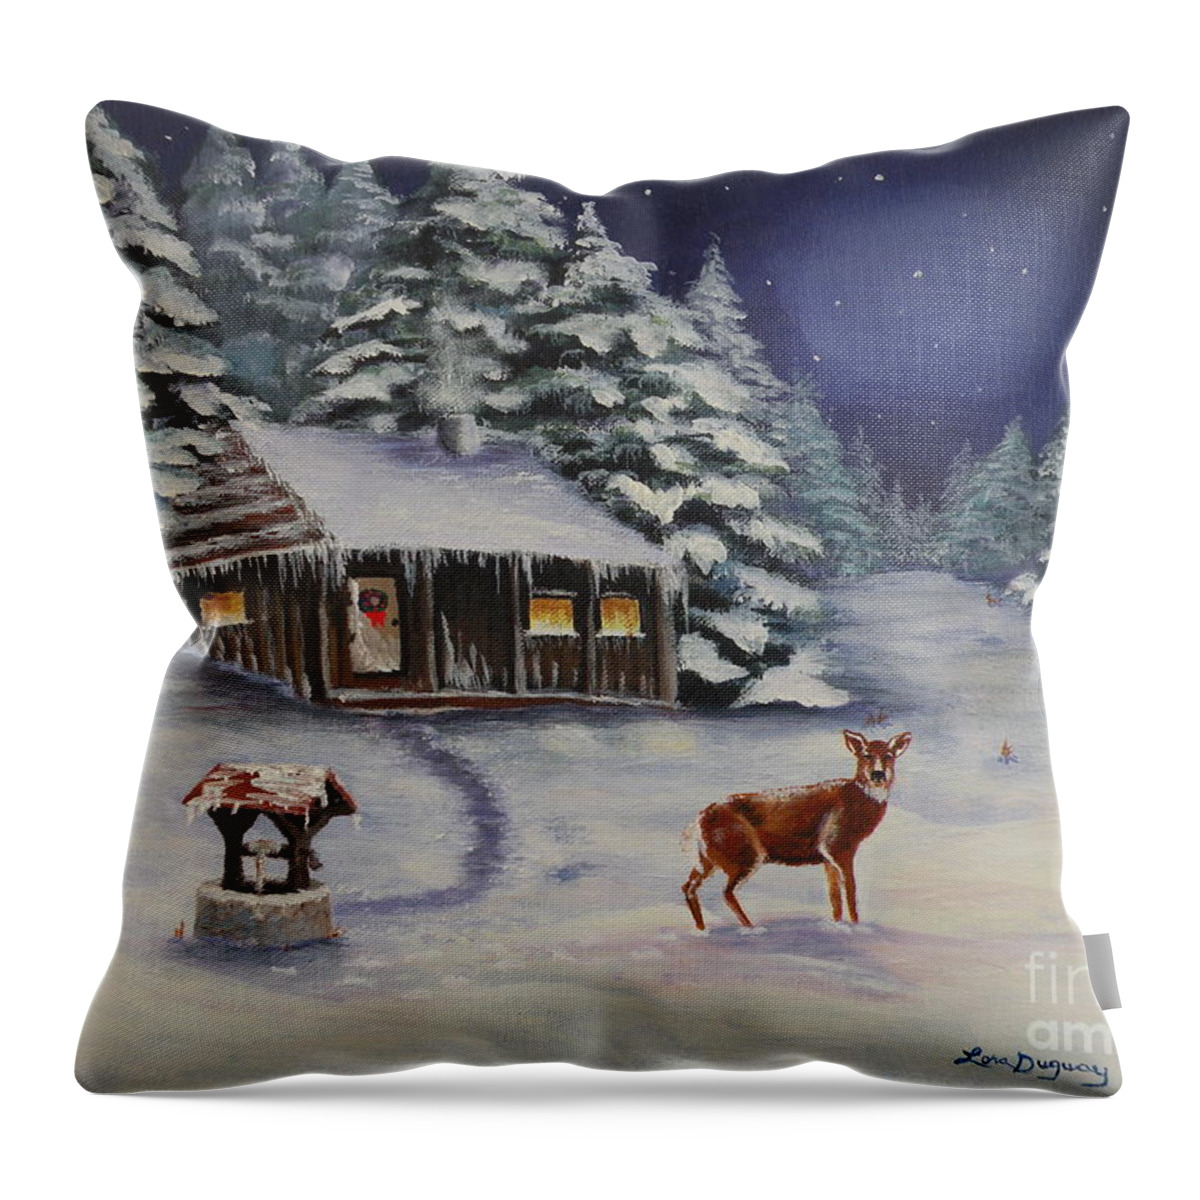 Snow Scene Throw Pillow featuring the painting White Christmas by Lora Duguay